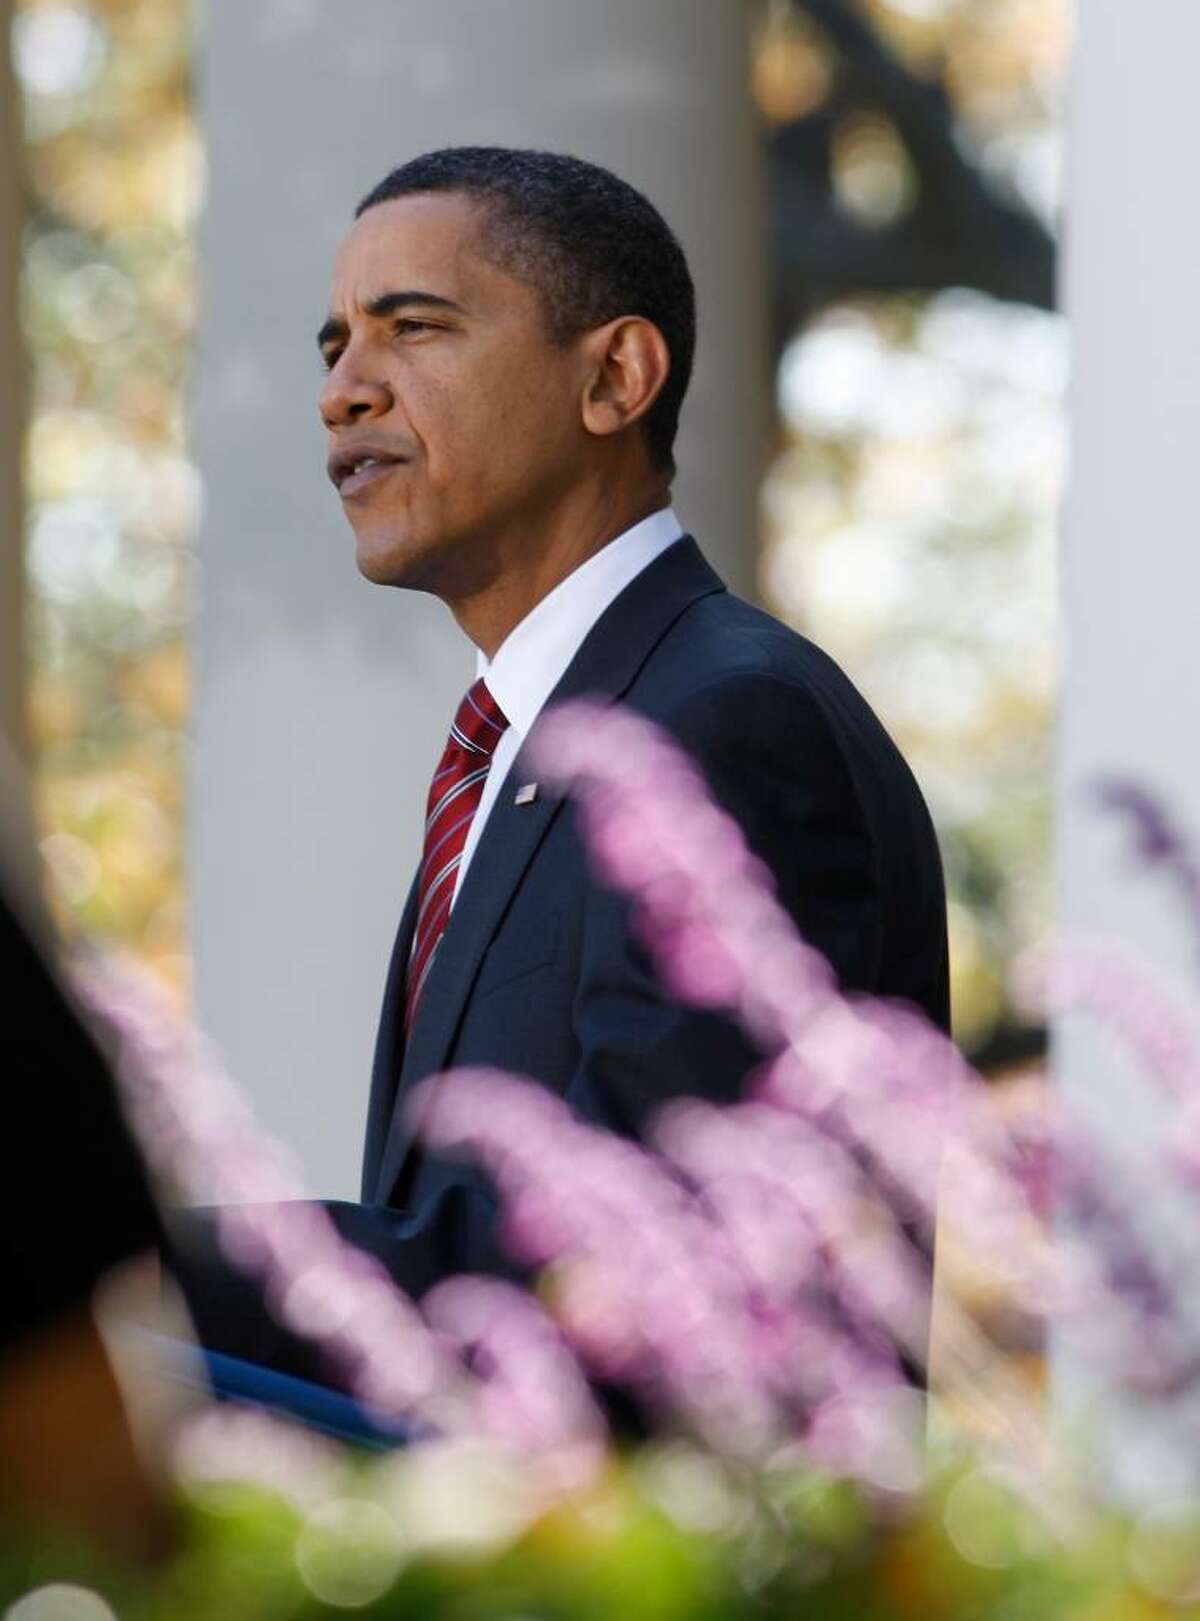 President Barack Obama speaks in the Rose Garden of the White House about health care reform and Iraq's new electoral law after returning from Camp David Sunday, Nov. 8, 2009, in Washington. (Ron Edmonds / Associated Press)